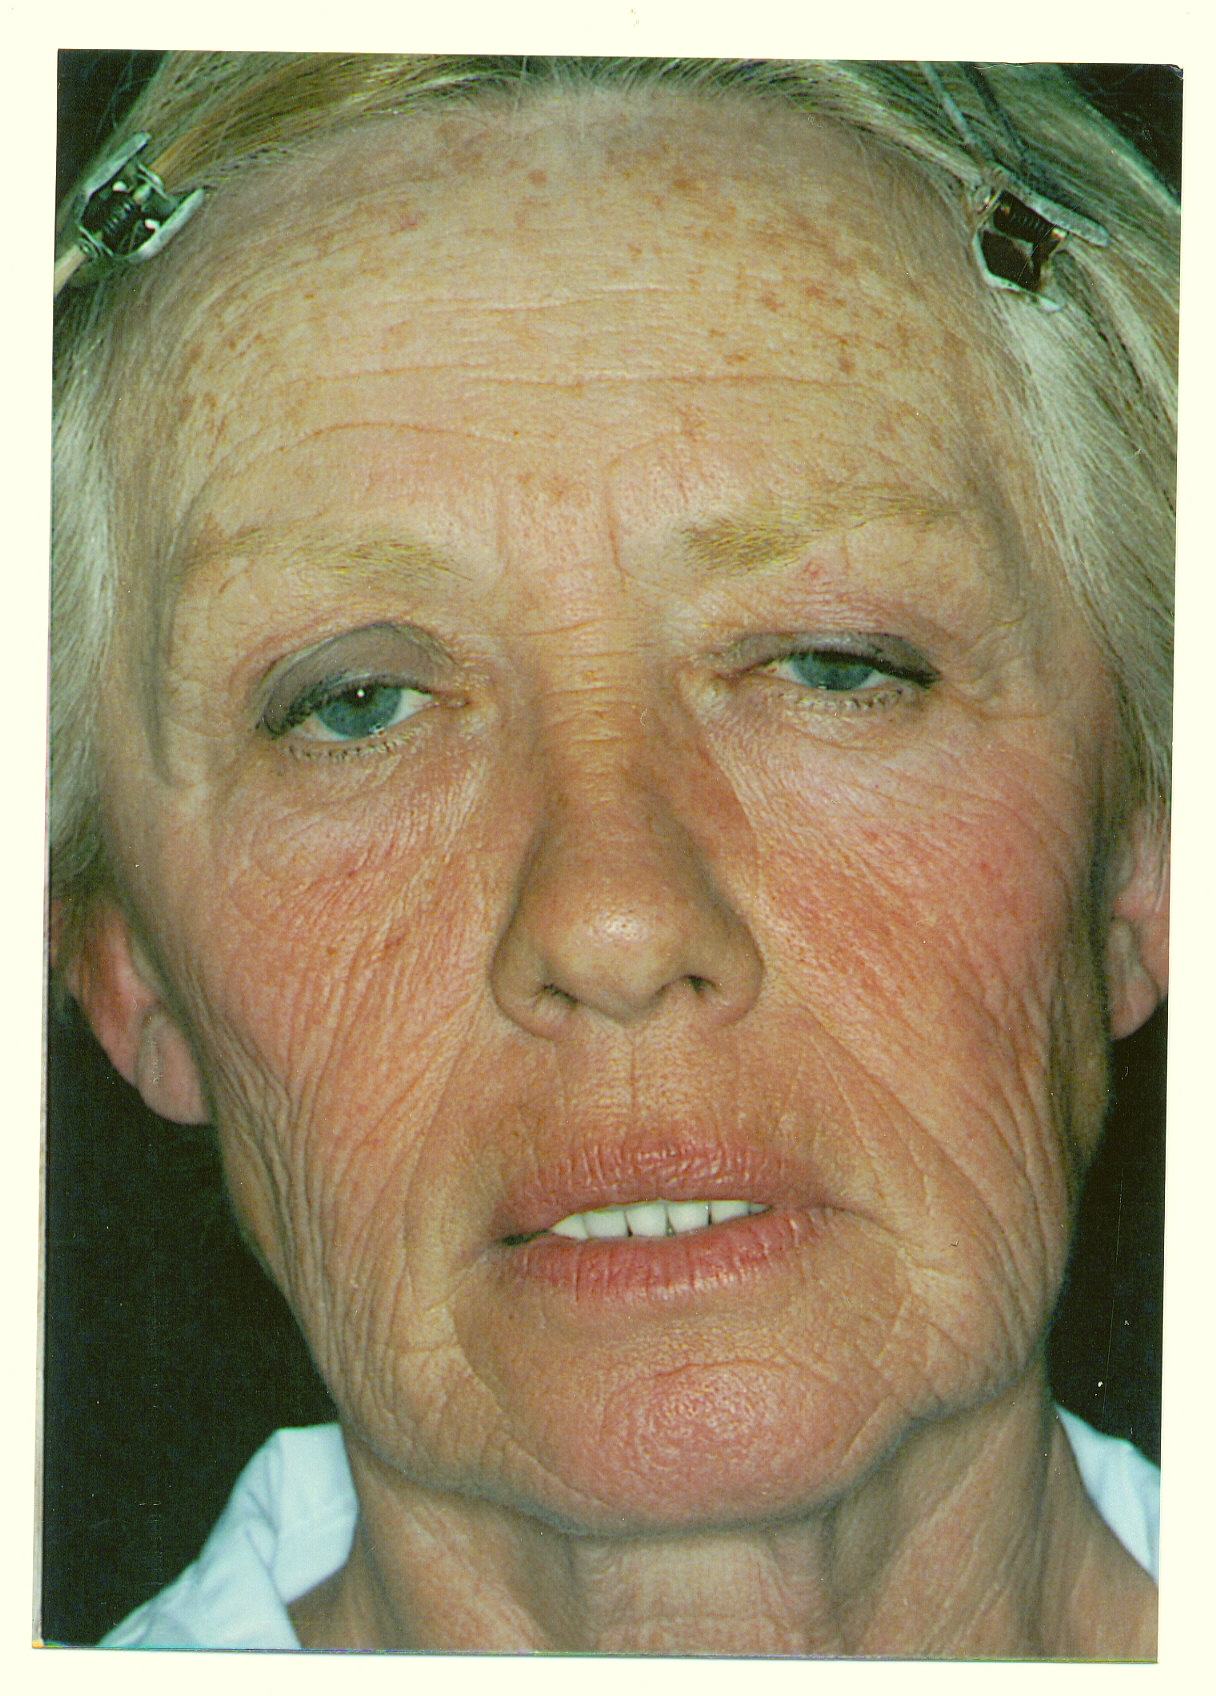 Full Facelift including browlift,eyelid surgery and Laser resurfacing - Before